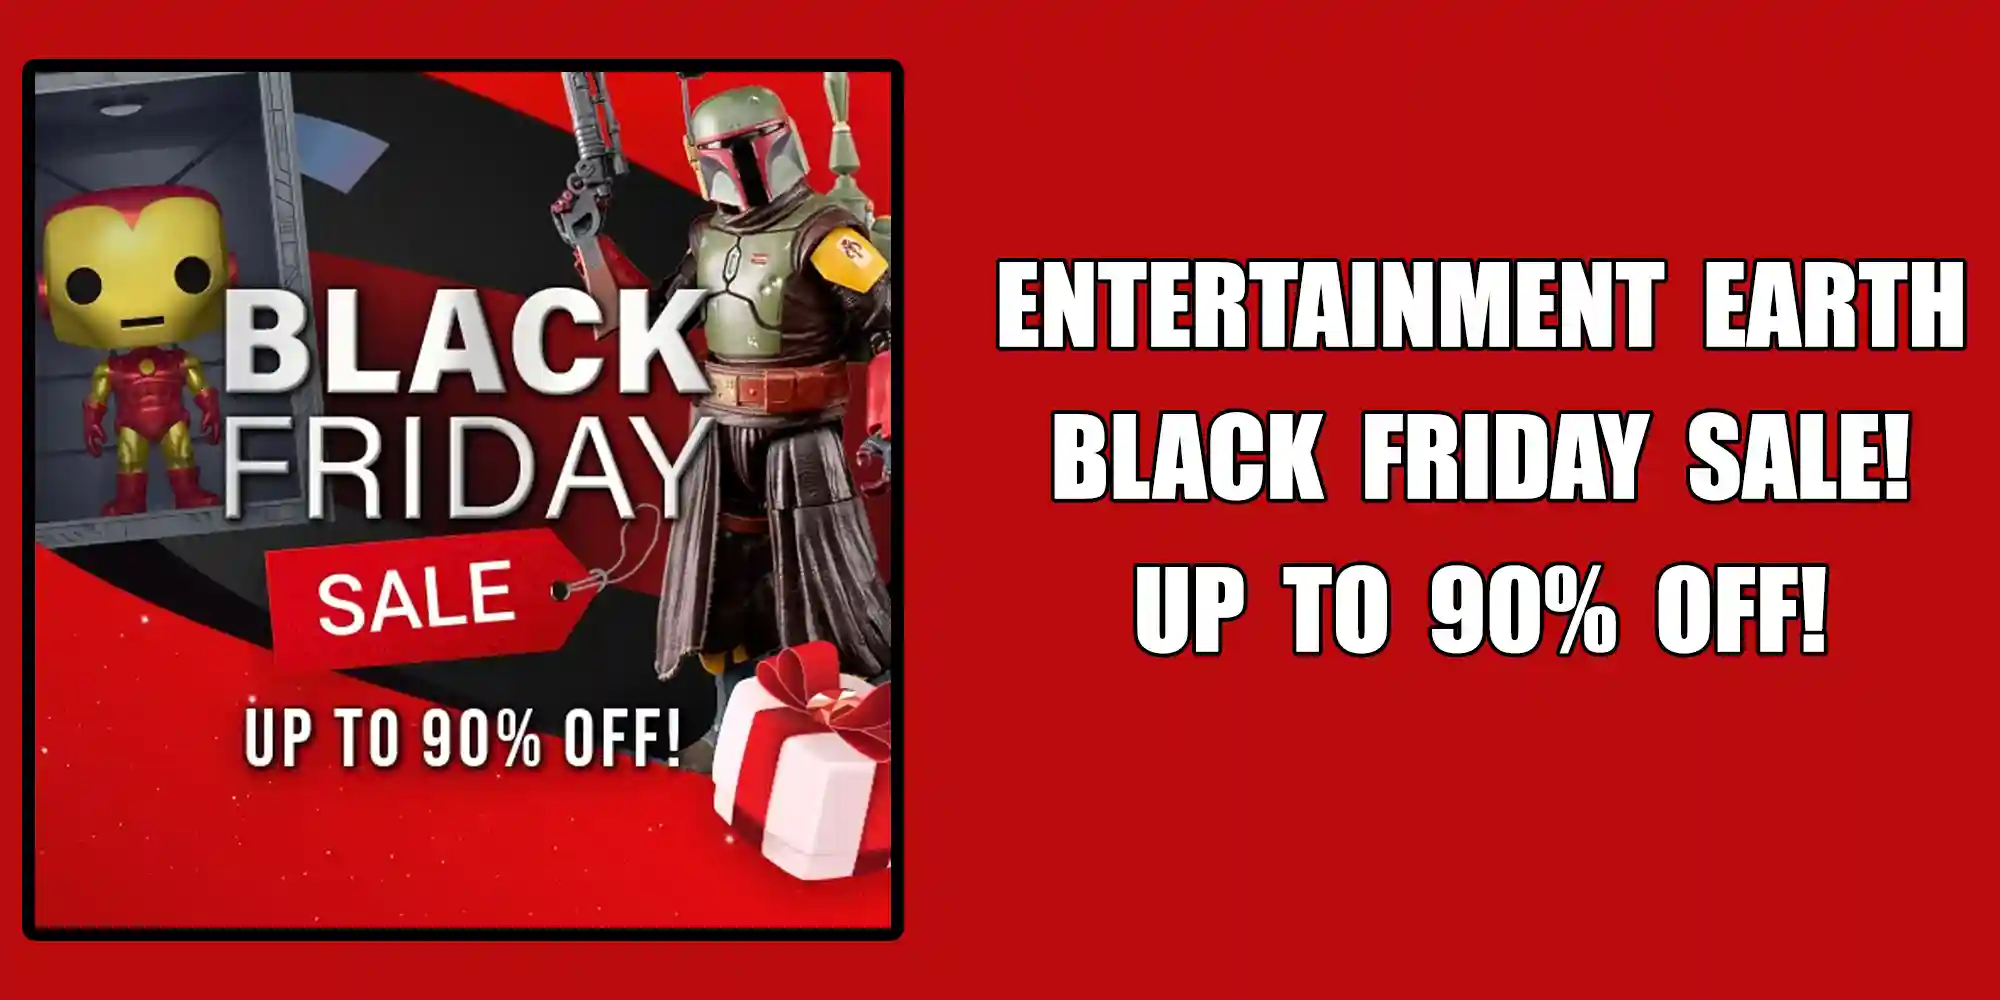 Black Friday Deals @ Entertainment Earth! Check it out!